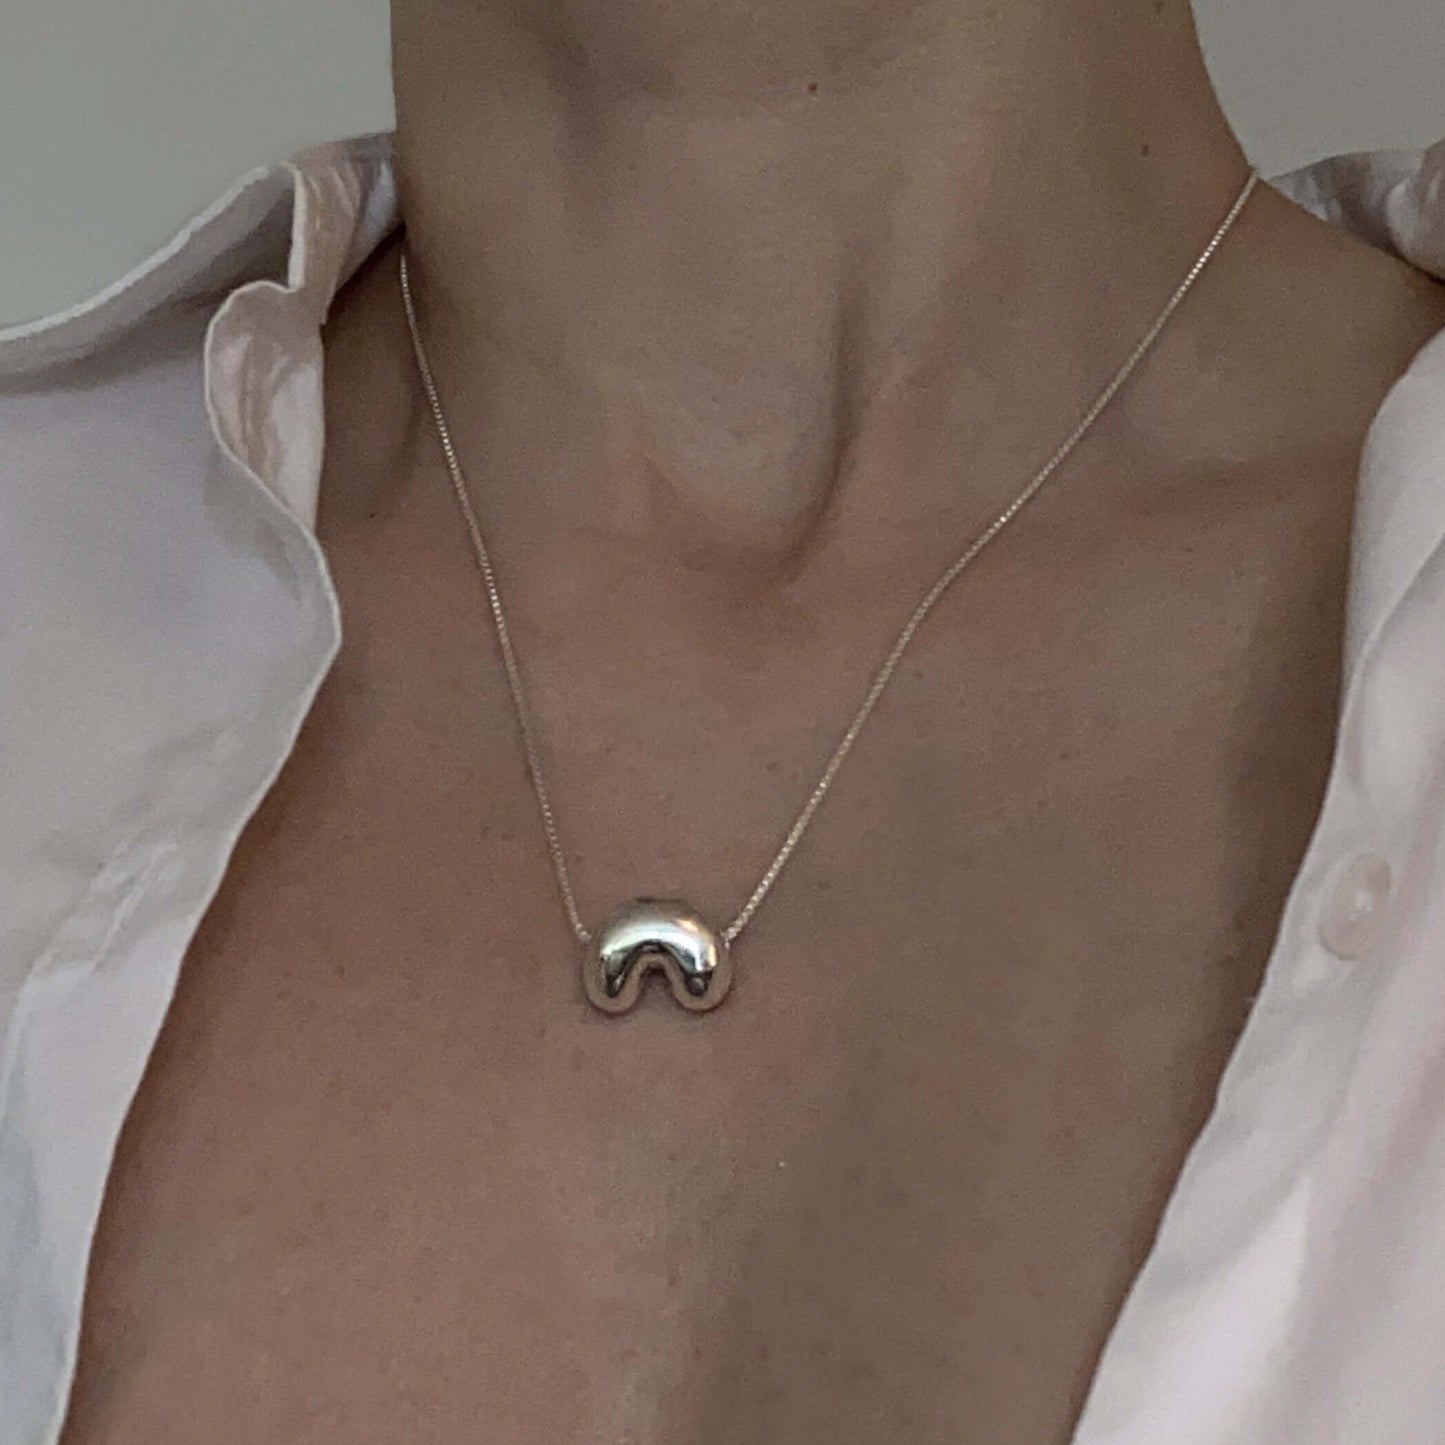 Close up on female neck and chest, wearing silver necklace with pendant